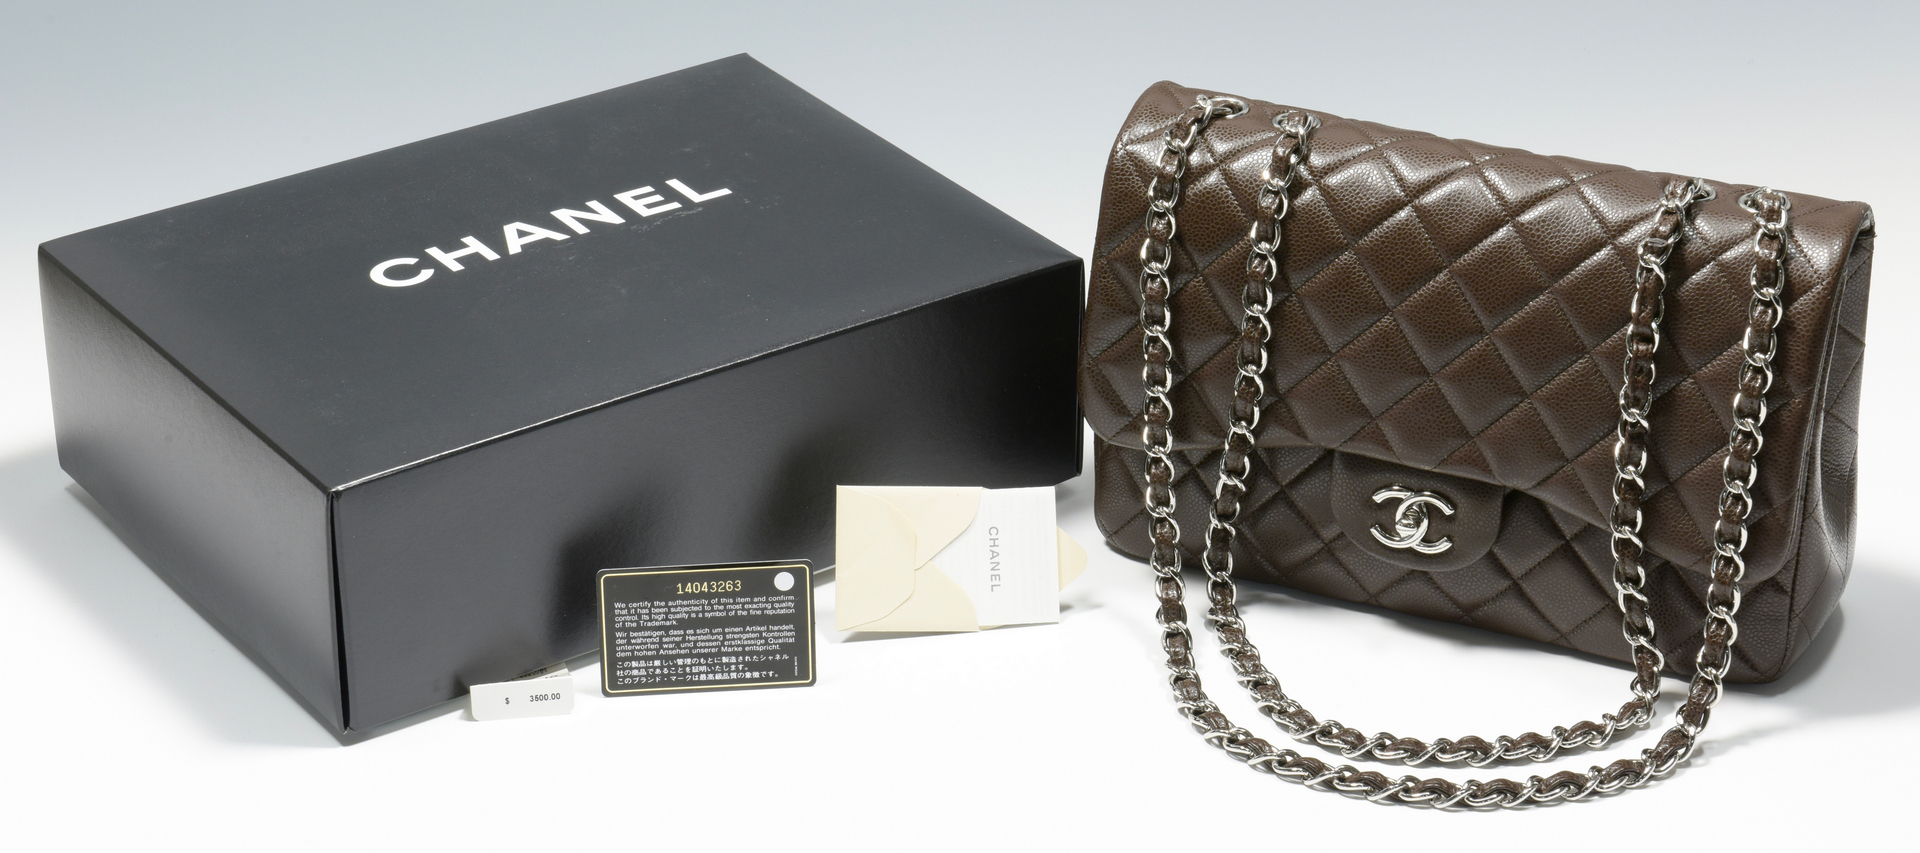 Lot 923: Chanel Jumbo Classic Flap Bag, Dark Brown Leather | Case Auctions